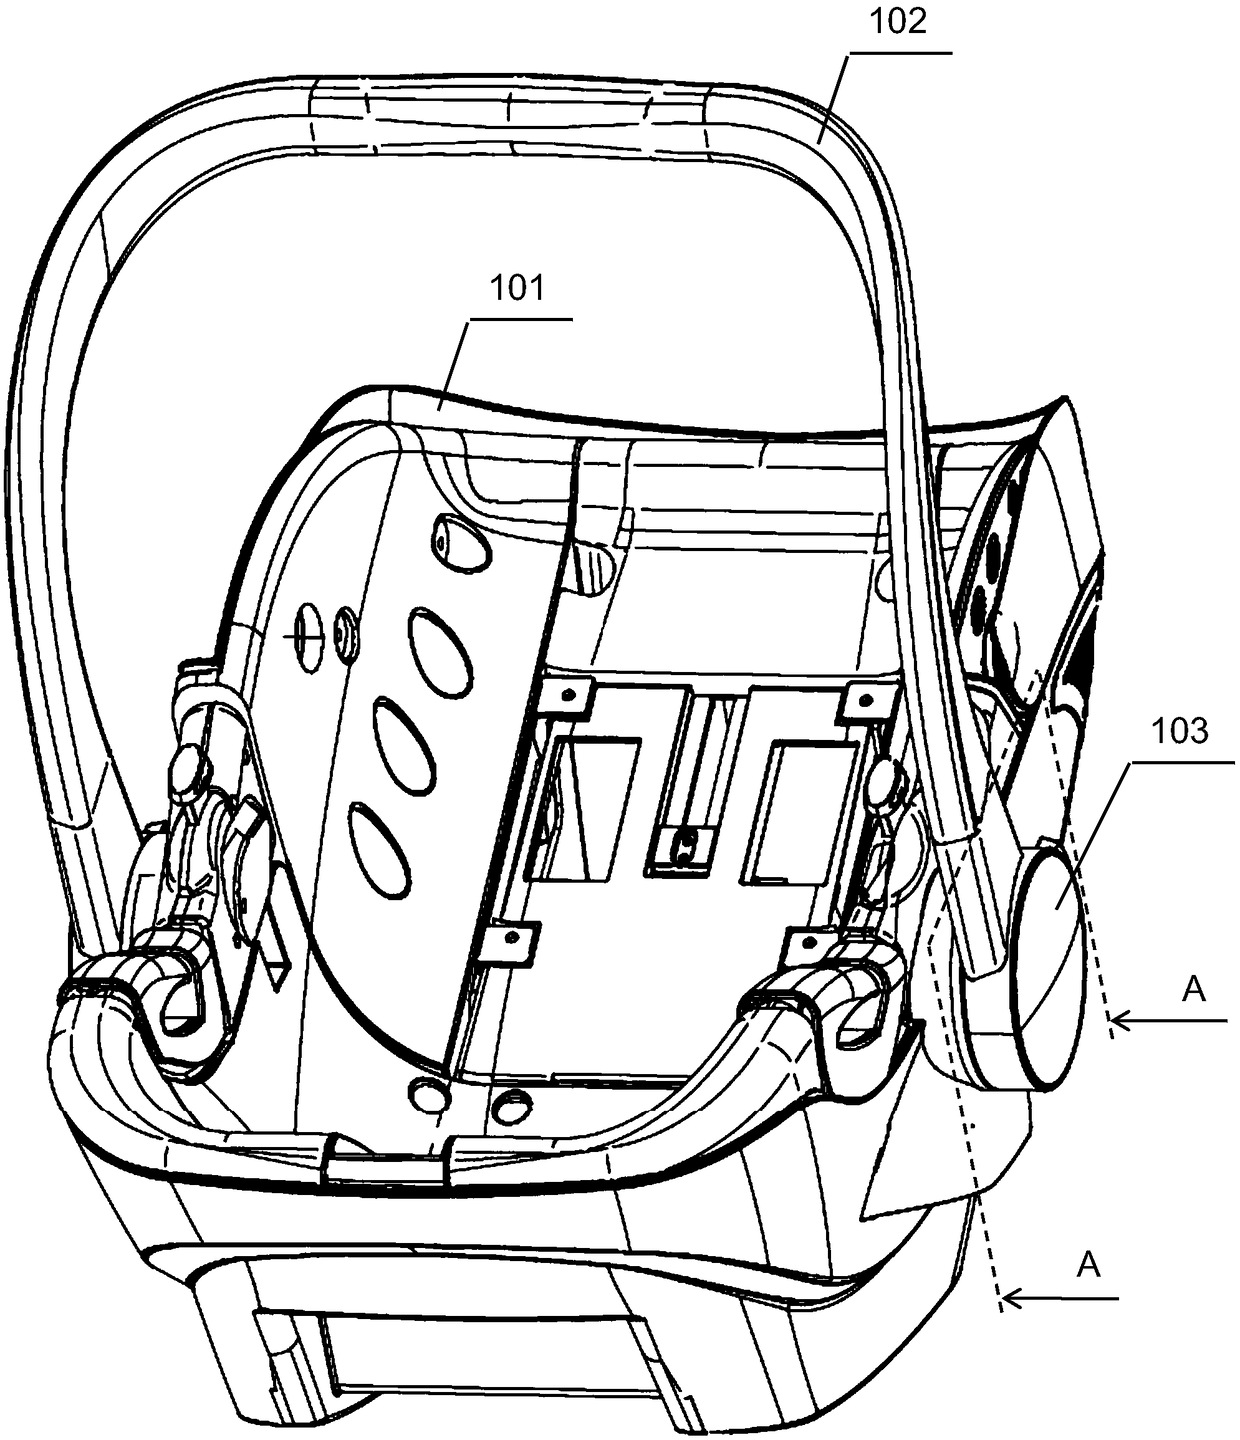 Infant carrying basket with slow rebound unlocking mechanism